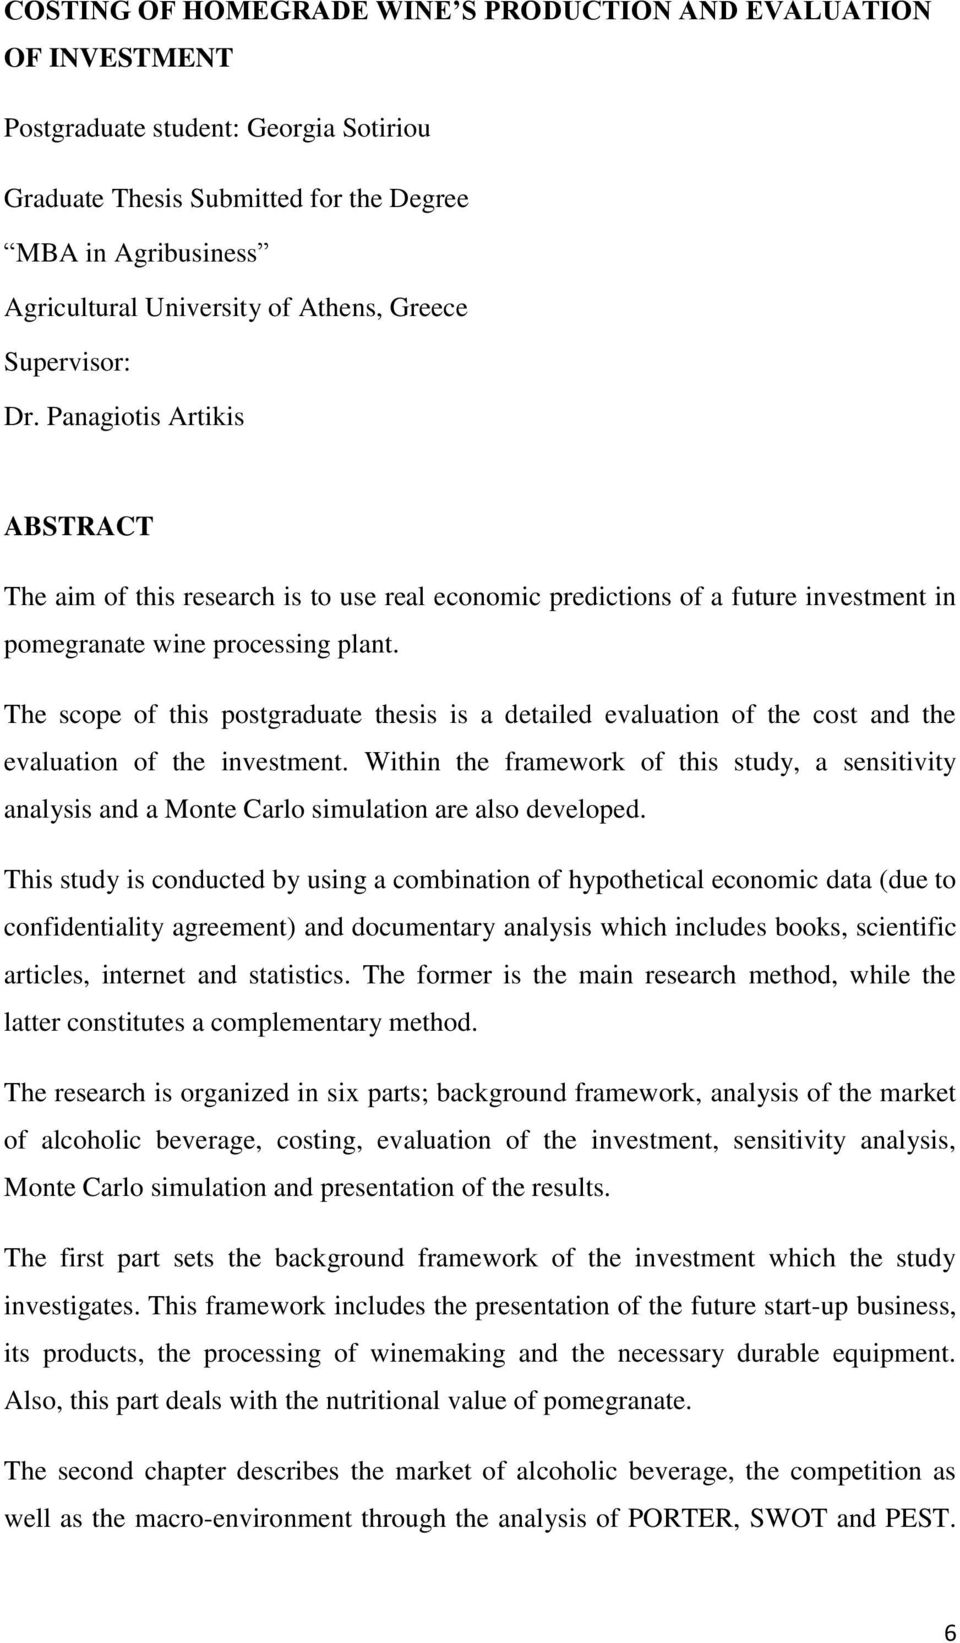 The scope of this postgraduate thesis is a detailed evaluation of the cost and the evaluation of the investment.